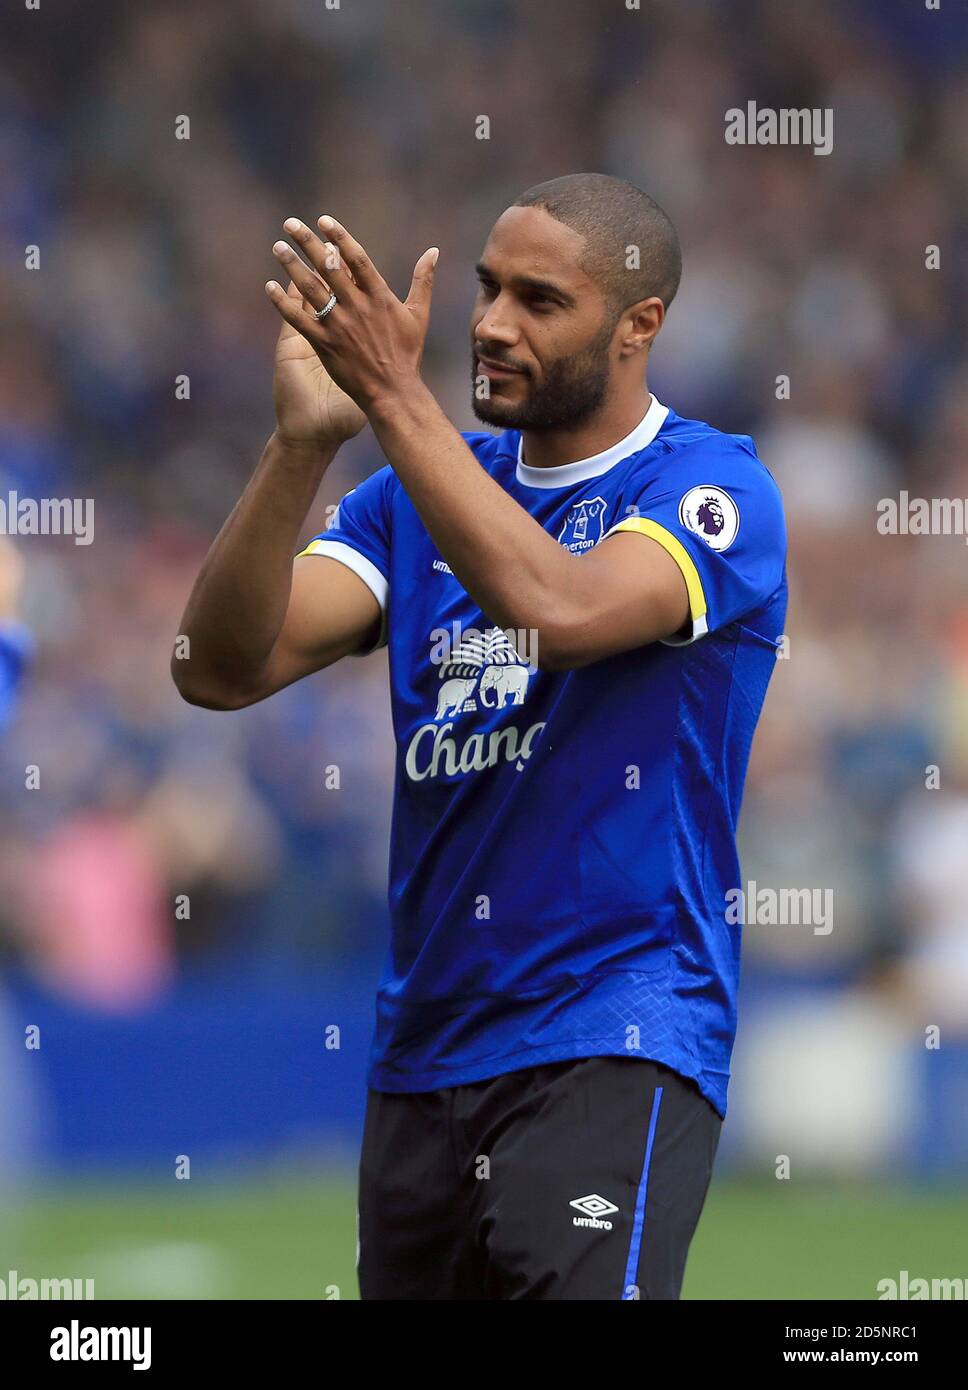 Everton's new signing Ashley Williams is introduced to the Goodison Park crowd before the Barclays Premier League game between Everton and Tottenham Hotspur. Stock Photo